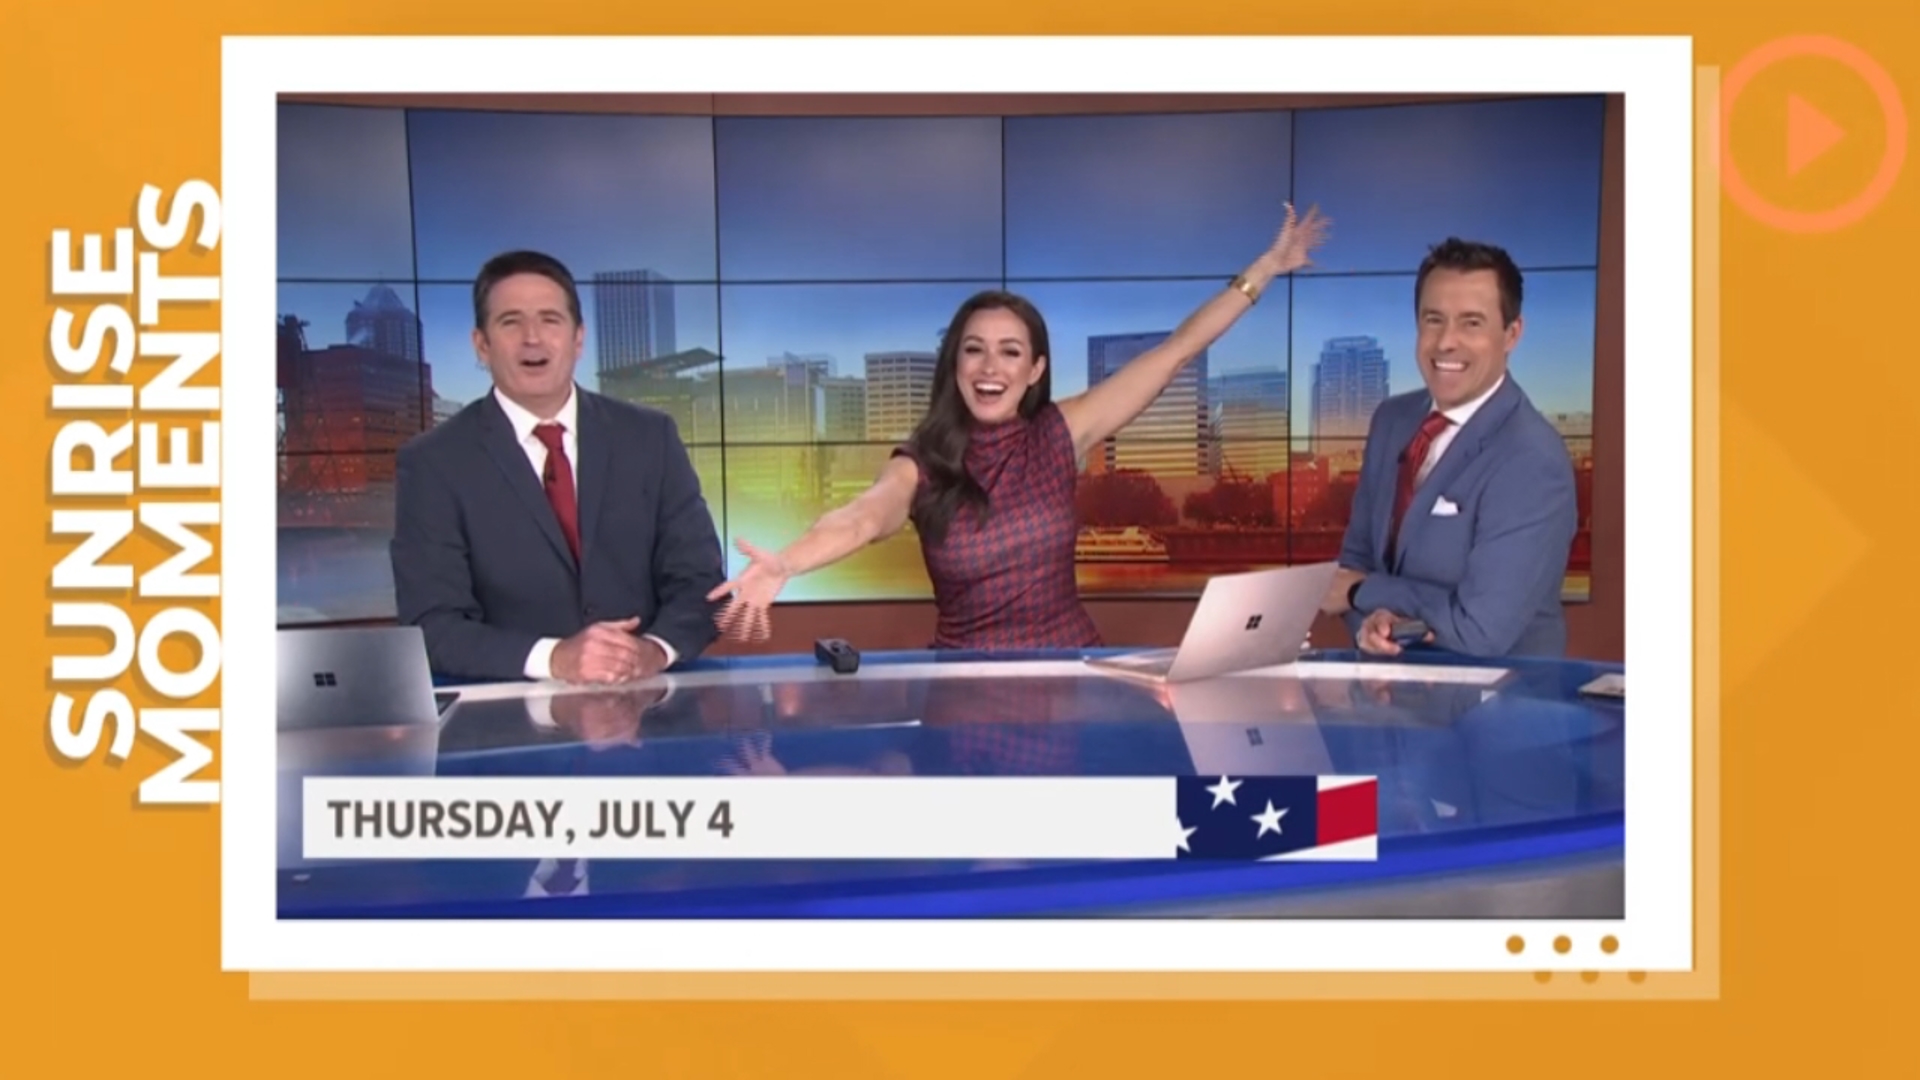 KGW Sunrise looked back at some of the lighter moments of the week.